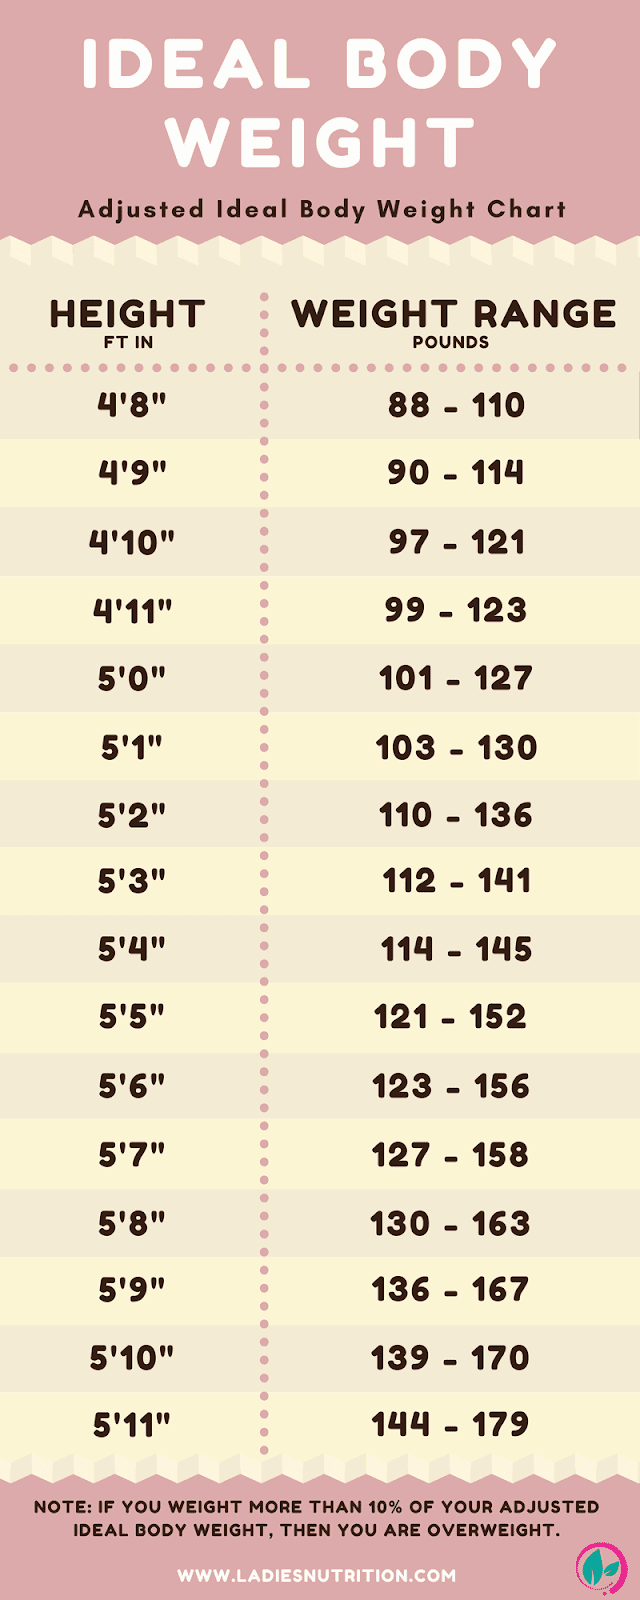 Ideal Body Weight Chart – How Much Should You Weigh?